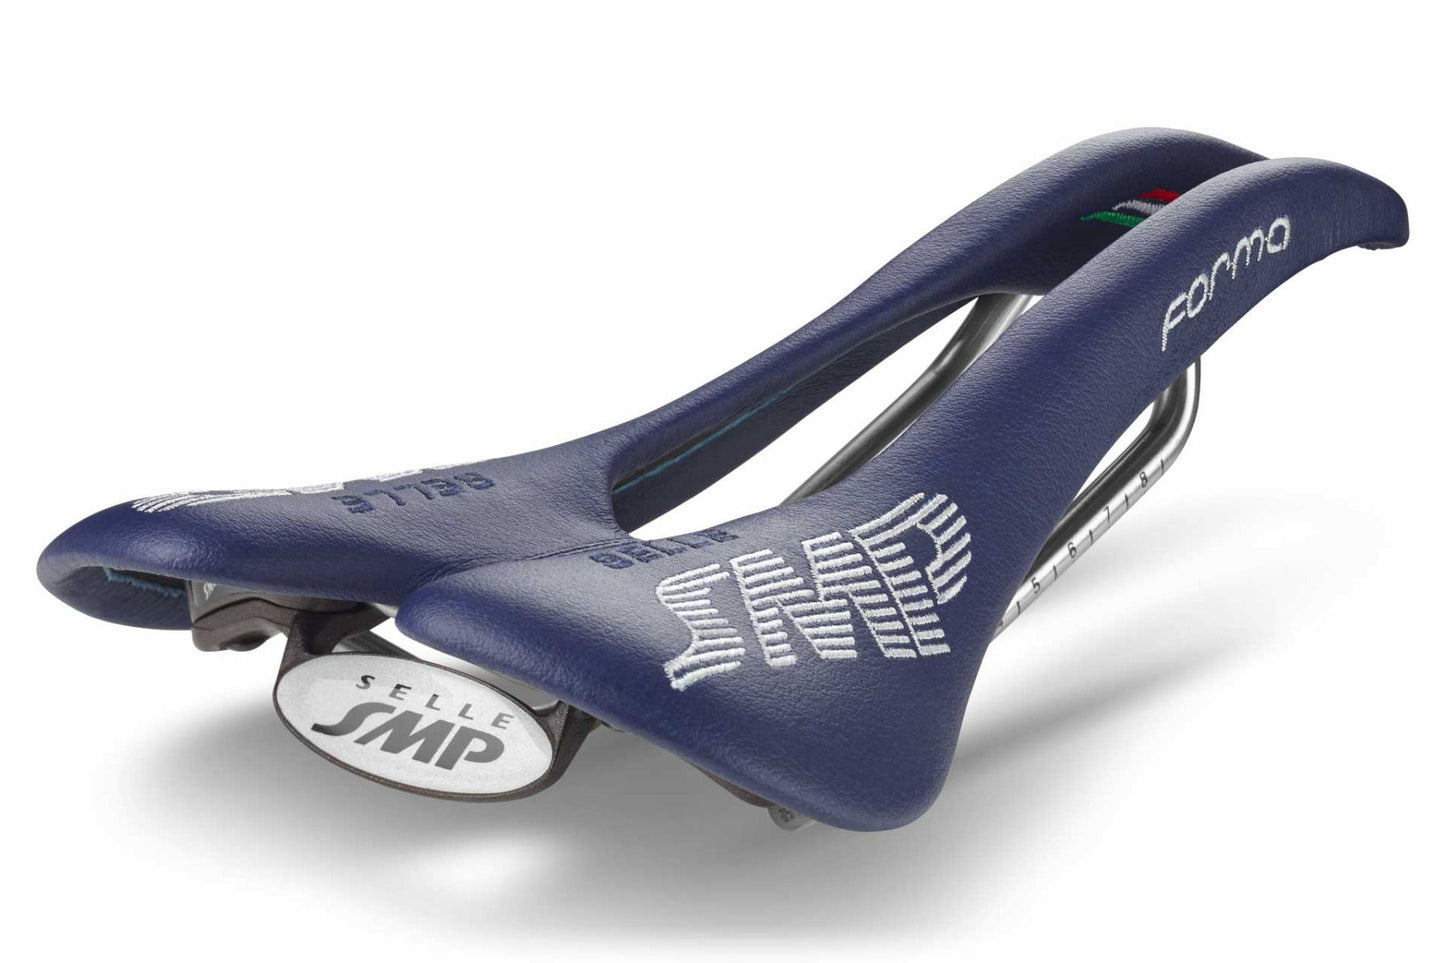 Selle SMP Forma Saddle with Steel Rails (Blue)